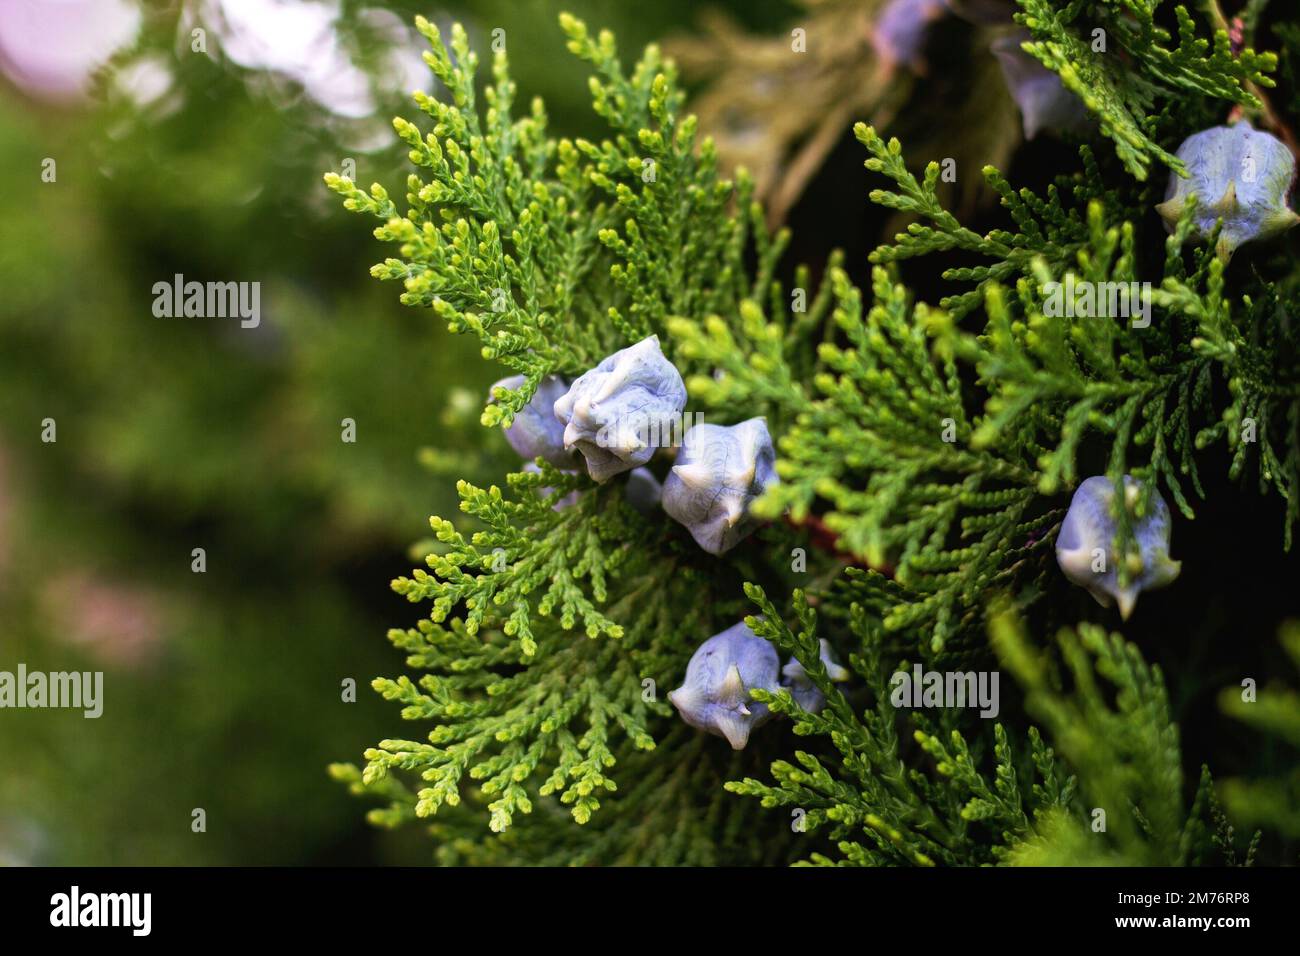 A closeup of green leaves of thuja tree on blurry background Stock Photo